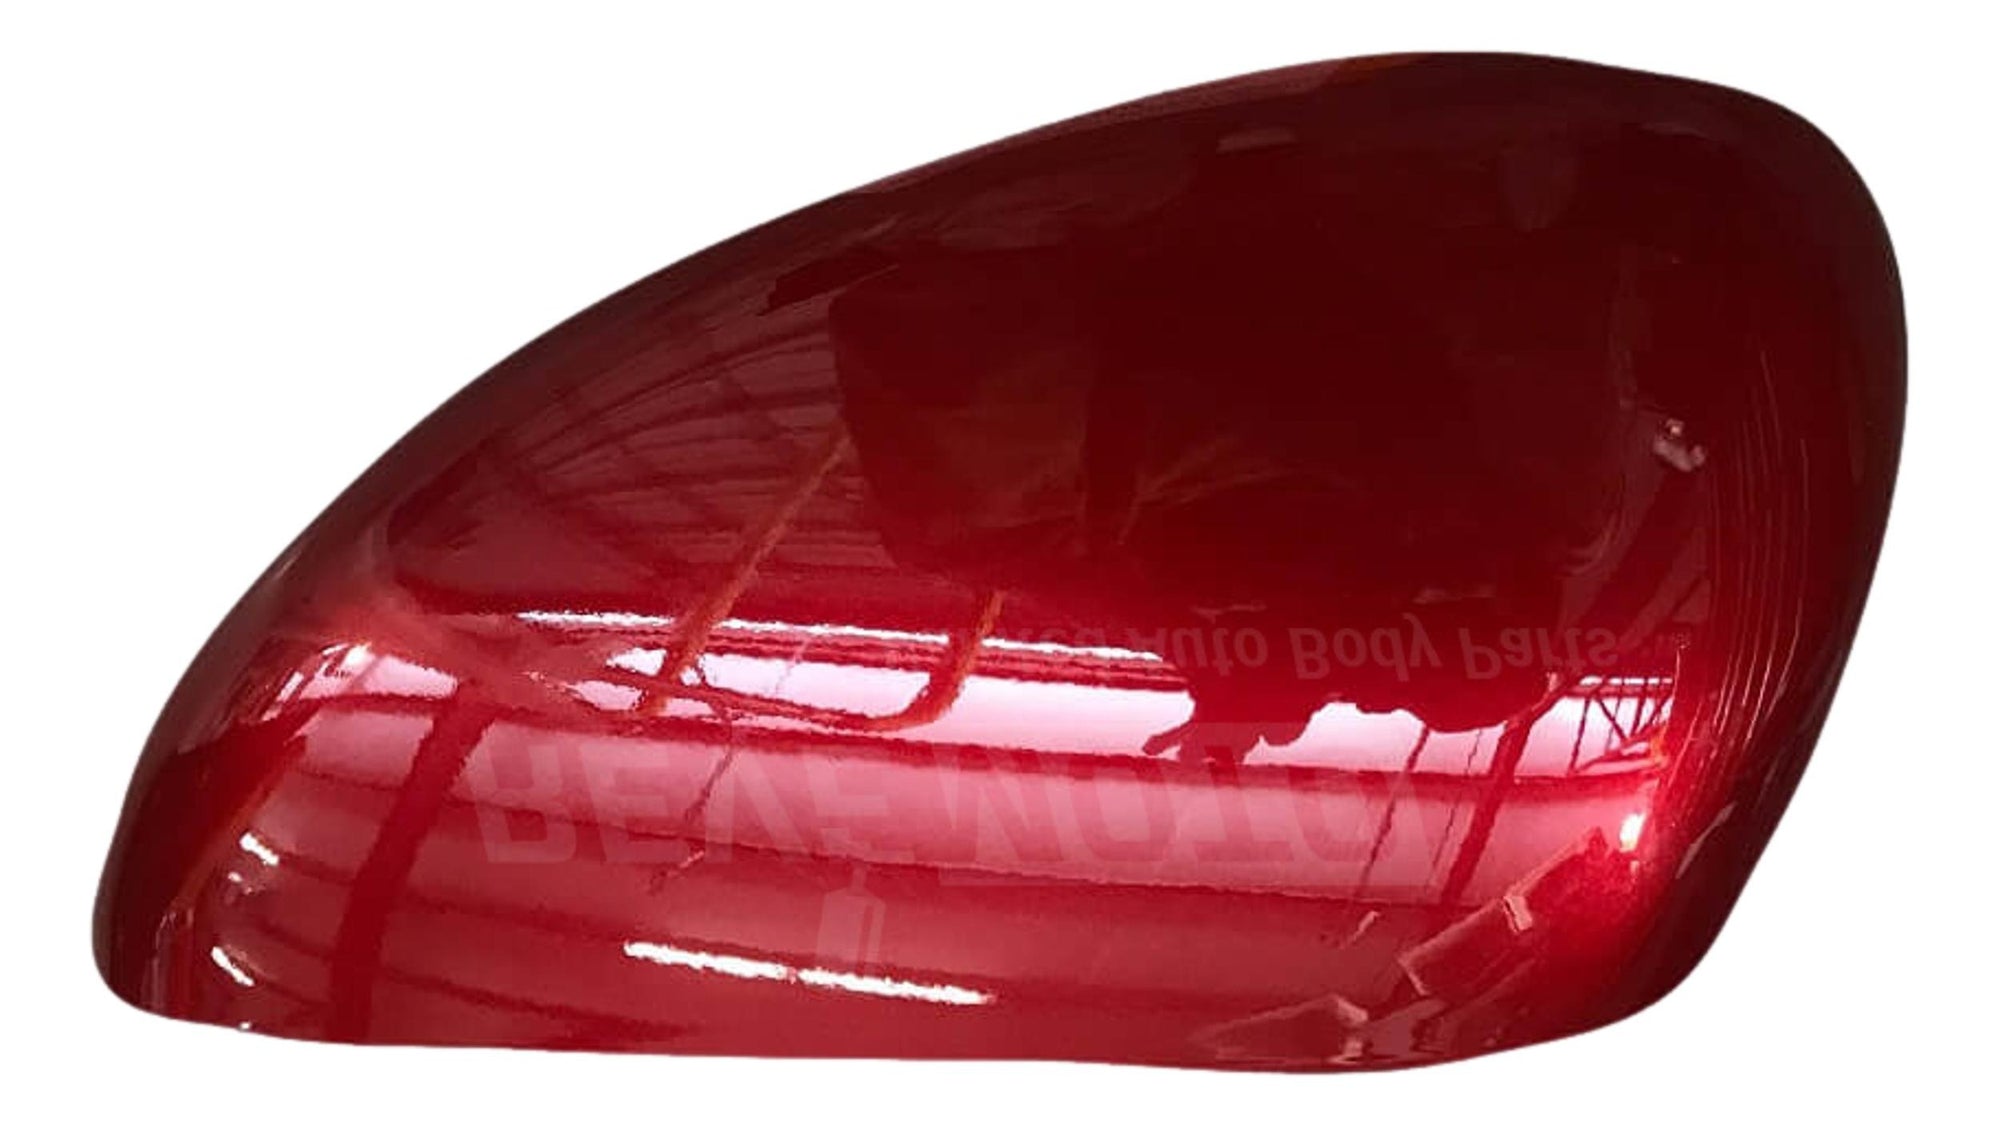 21439 - 2020-2021 Ford Escape Side View Mirror Cover Lucid Red Pearl (D4) OEMLJ6Z17D743BAPTM